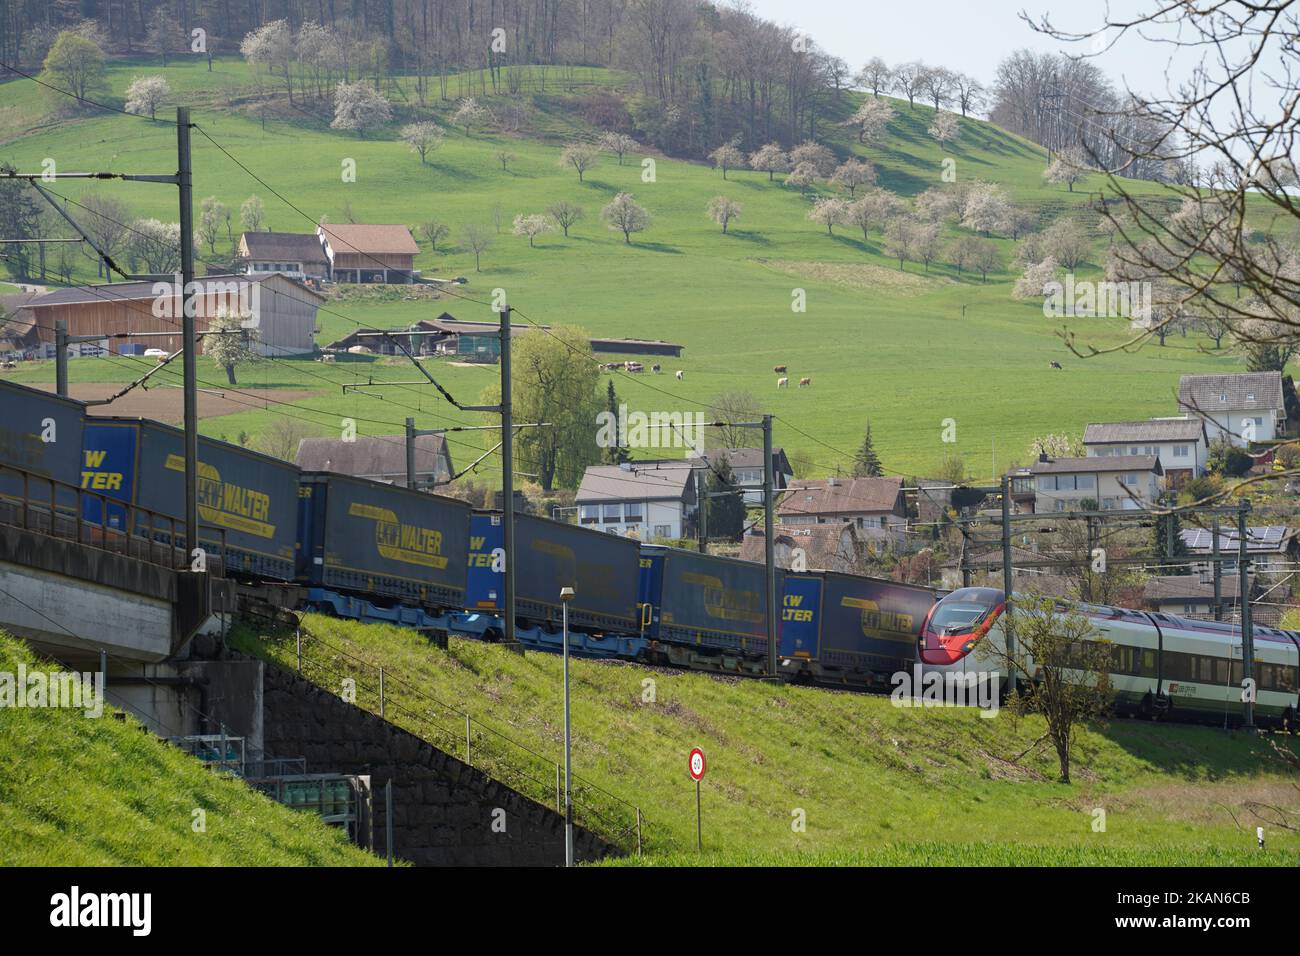 A SBB train and a container train moving through the field with houses and trees, Sissach, Switzerland Stock Photo